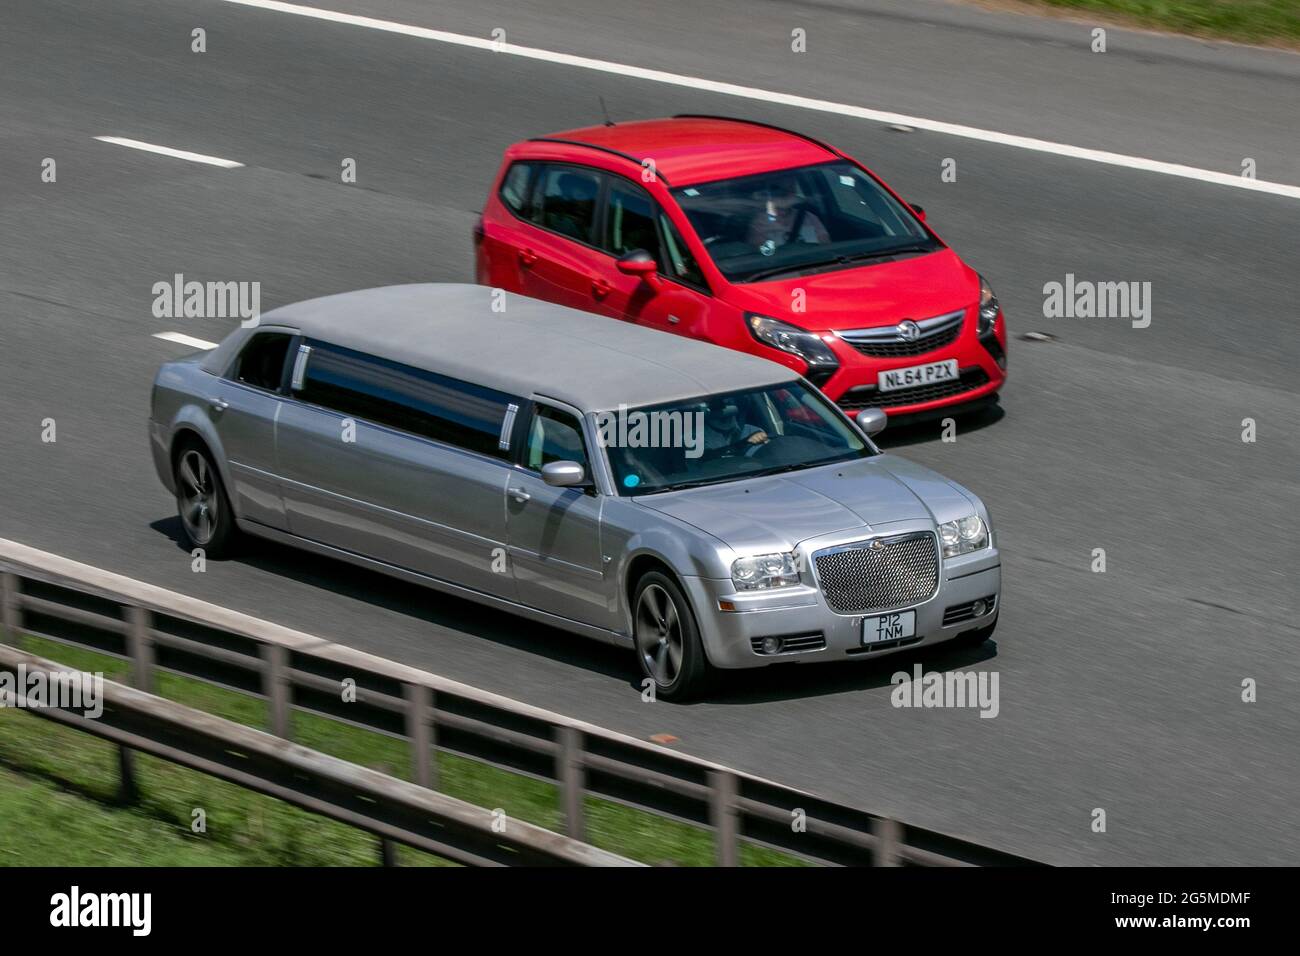 2007 Chrysler 300 C stretched limo, driving on the M6 motorway near Preston in Lancashire, UK. Stock Photo